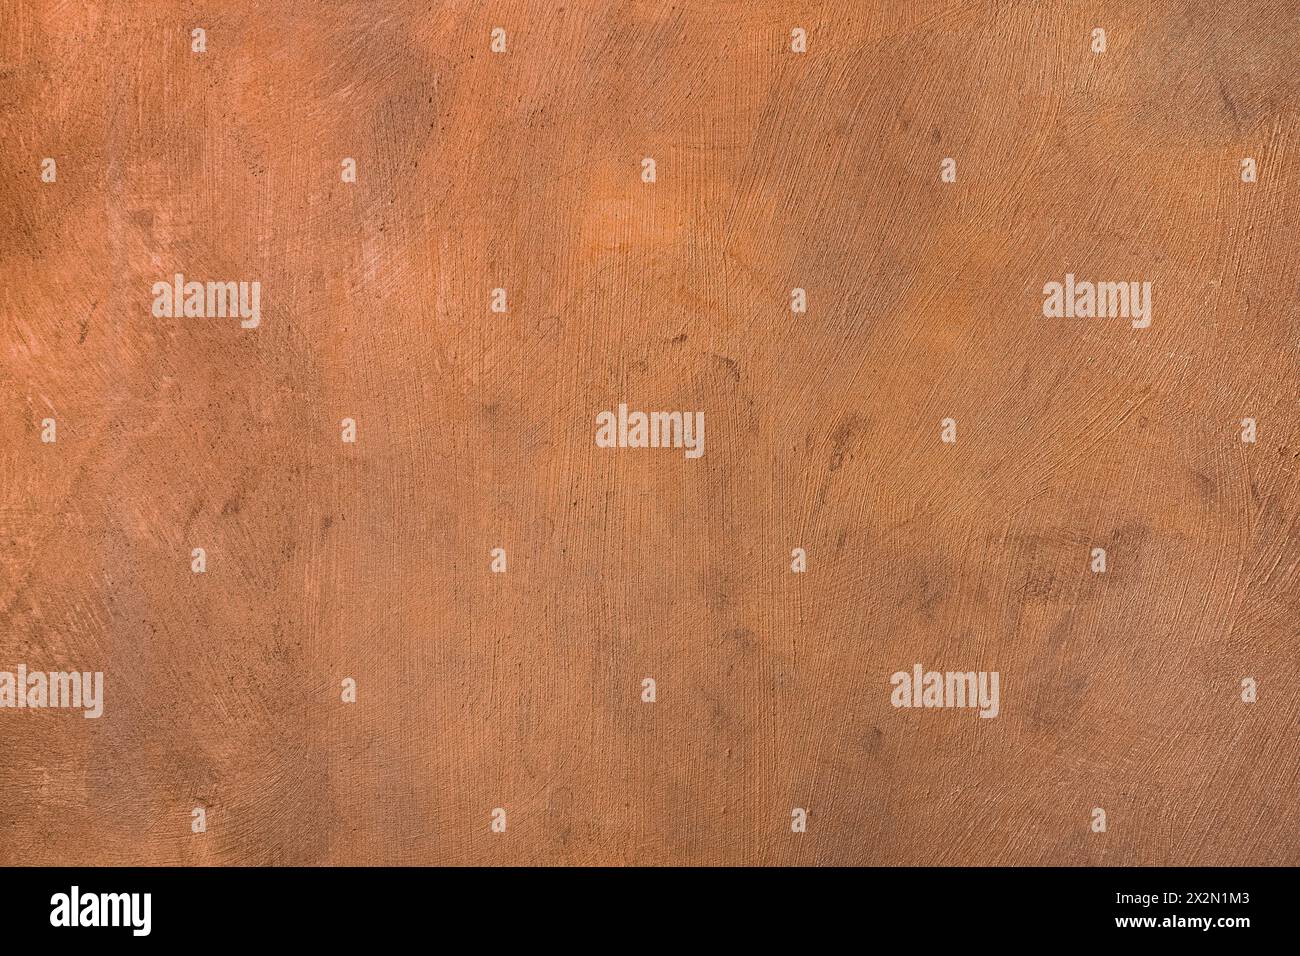 Copper coloured painted surface with metallic enamel and visible brush strokes Stock Photo